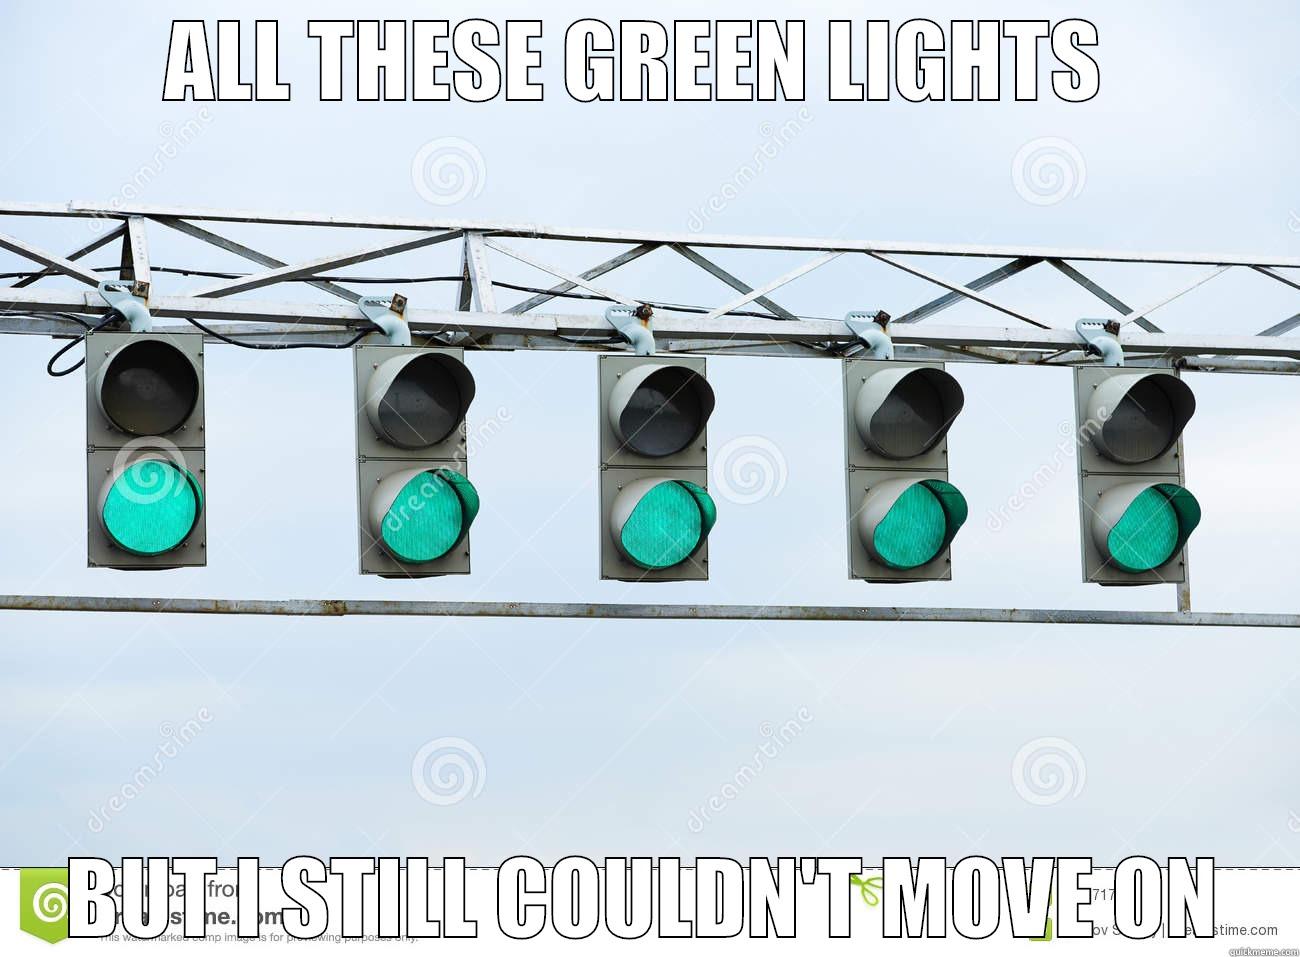 Moving on - ALL THESE GREEN LIGHTS  BUT I STILL COULDN'T MOVE ON Misc